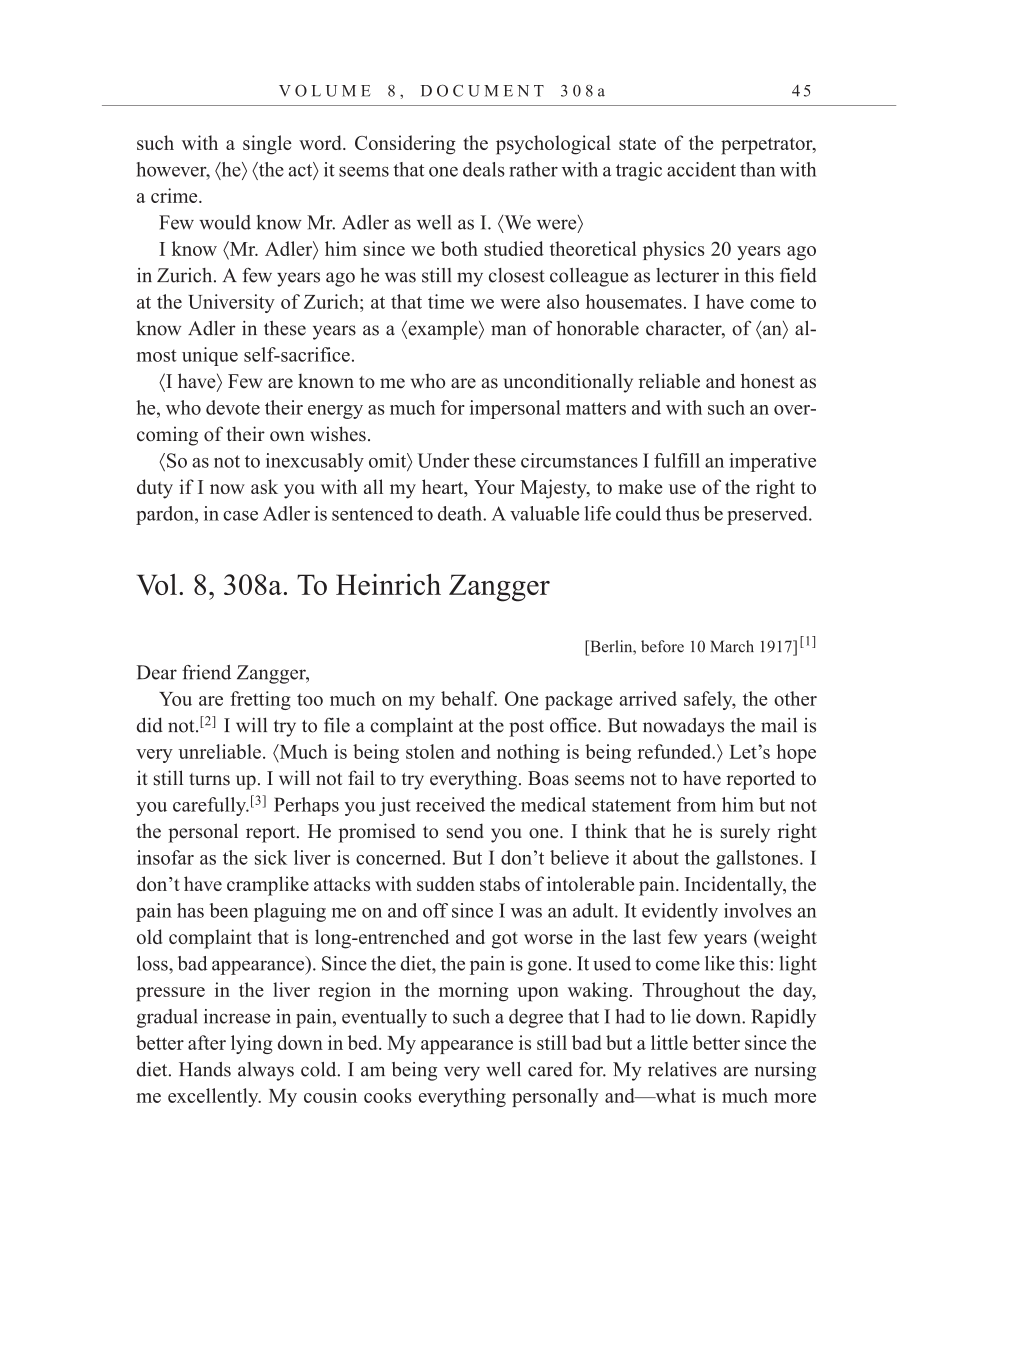 Volume 10: The Berlin Years: Correspondence, May-December 1920, and Supplementary Correspondence, 1909-1920 (English translation supplement) page 45